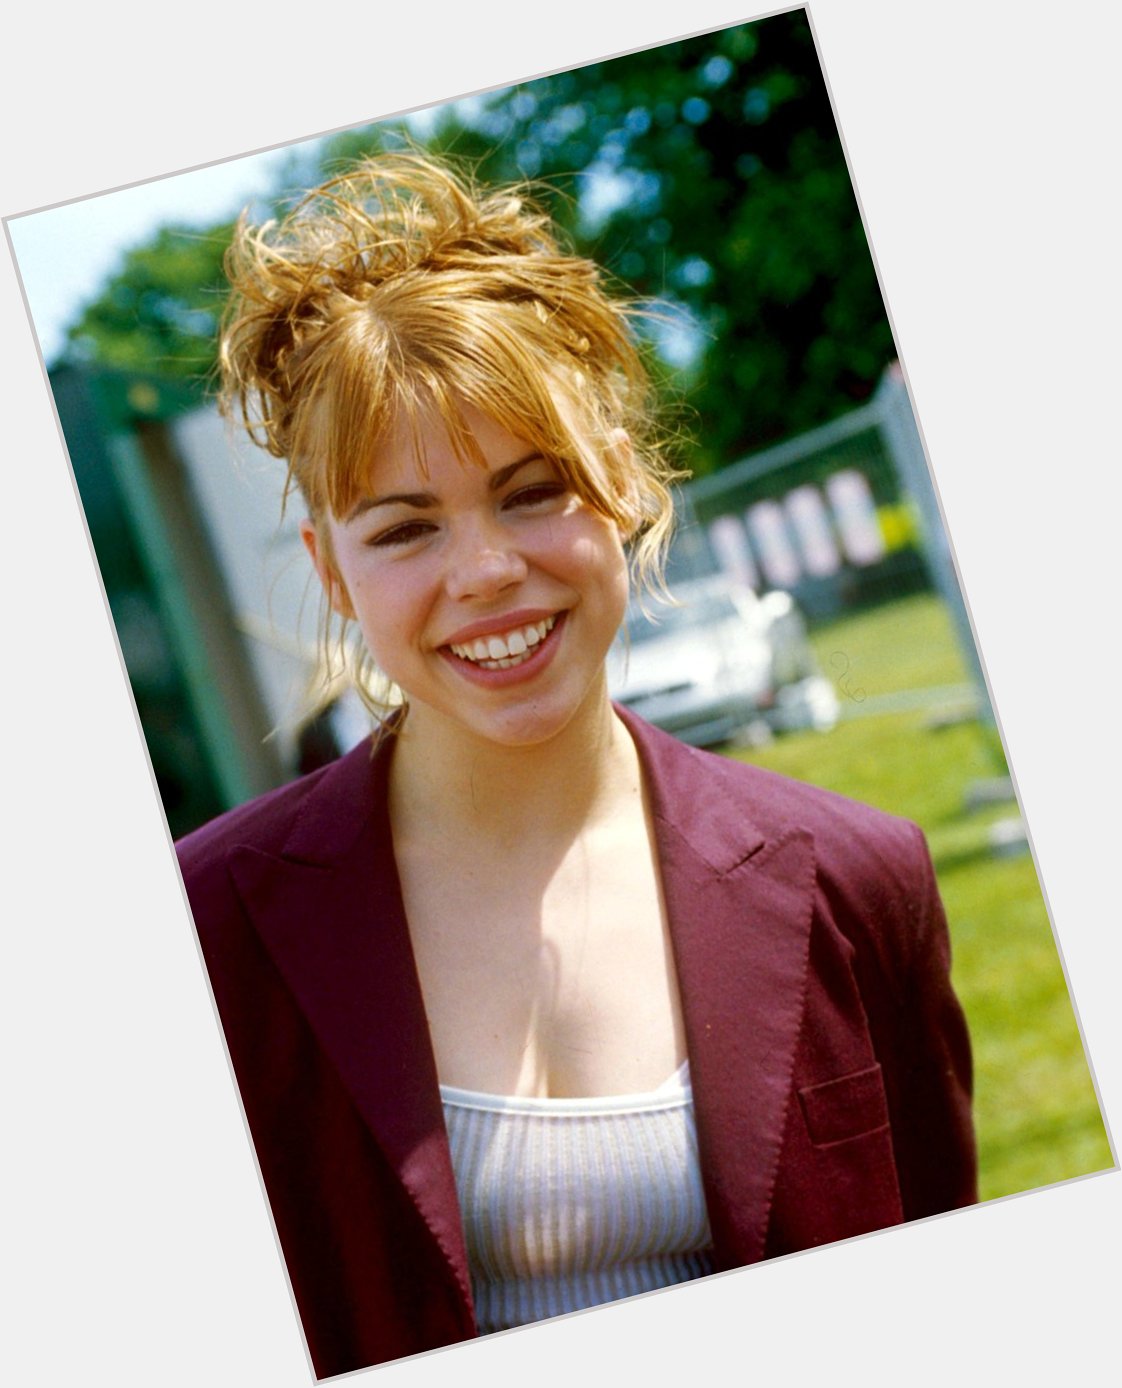   Lookmagazine: Happy 33rd Birthday Billie Piper!
Check out our celebs as teens gallery right here 